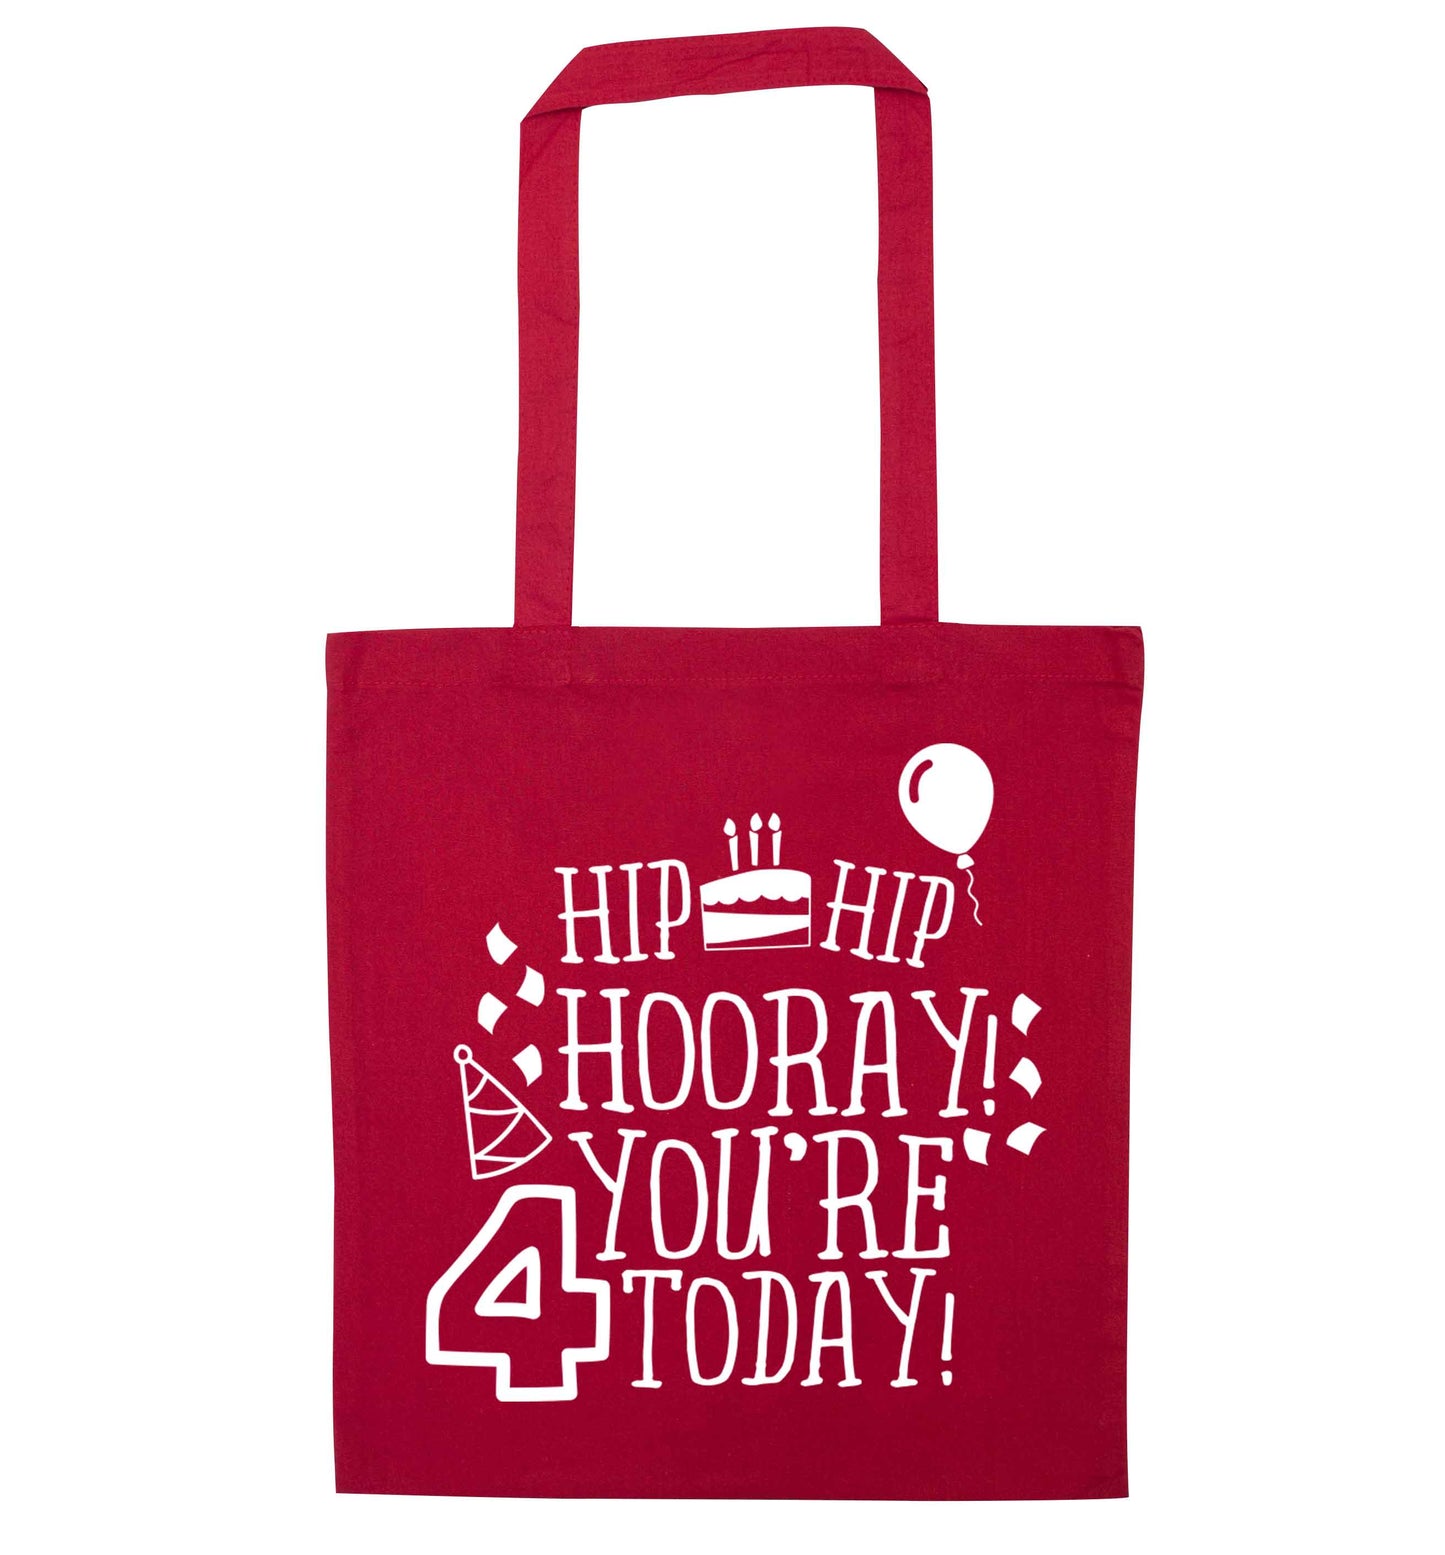 Hip hip hooray you're four today!red tote bag